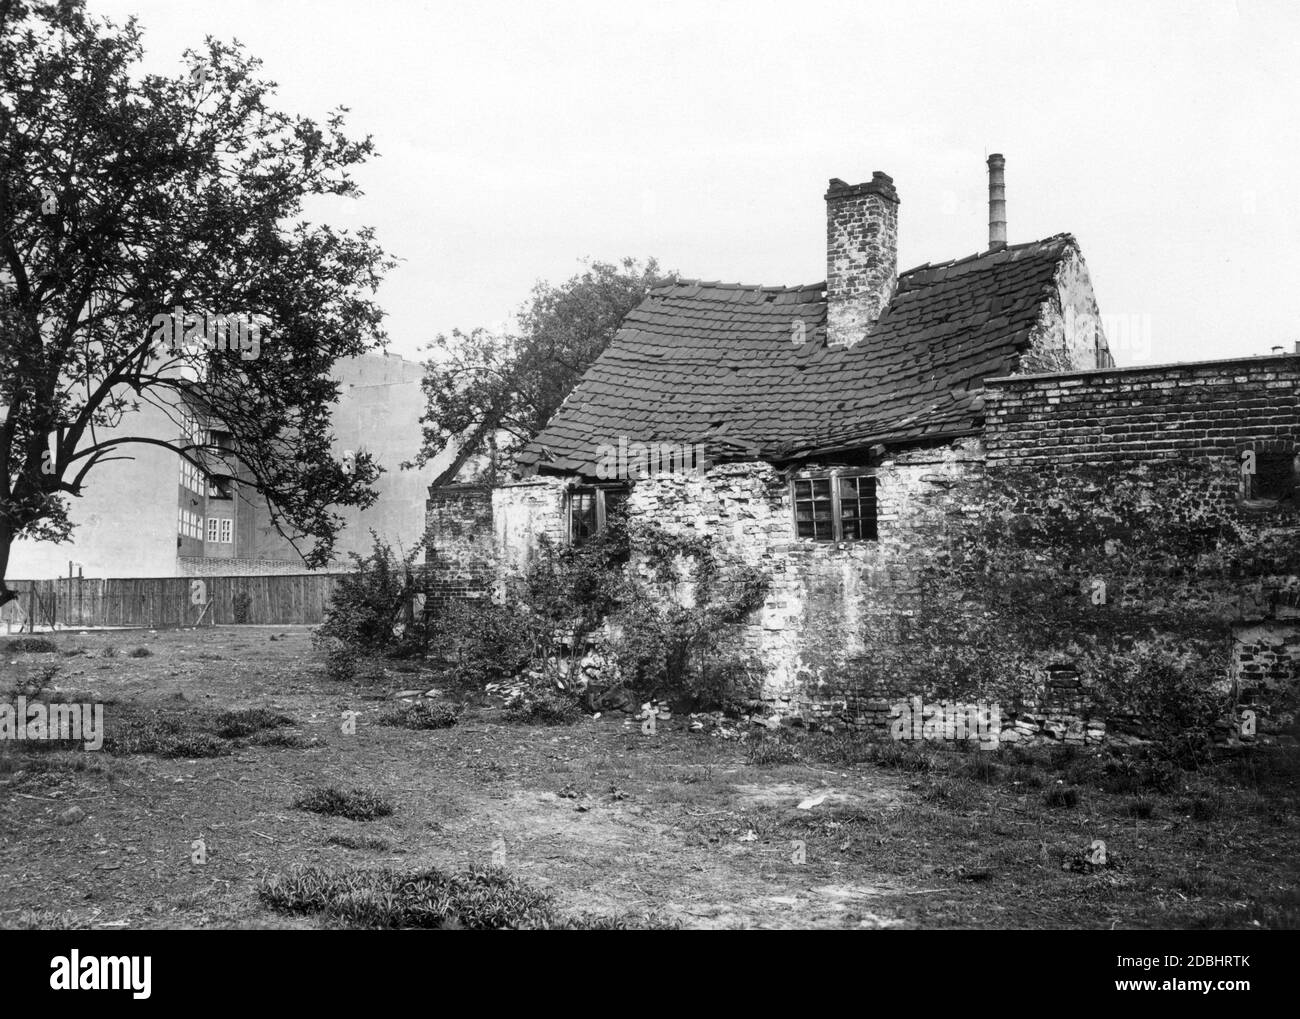 The 1932 photograph shows a dilapidated, abandoned stable of an old farm in Berlin at Muellerstrasse 16, behind which a more modern house and a factory chimney of the steadily growing city are already standing. Stock Photo